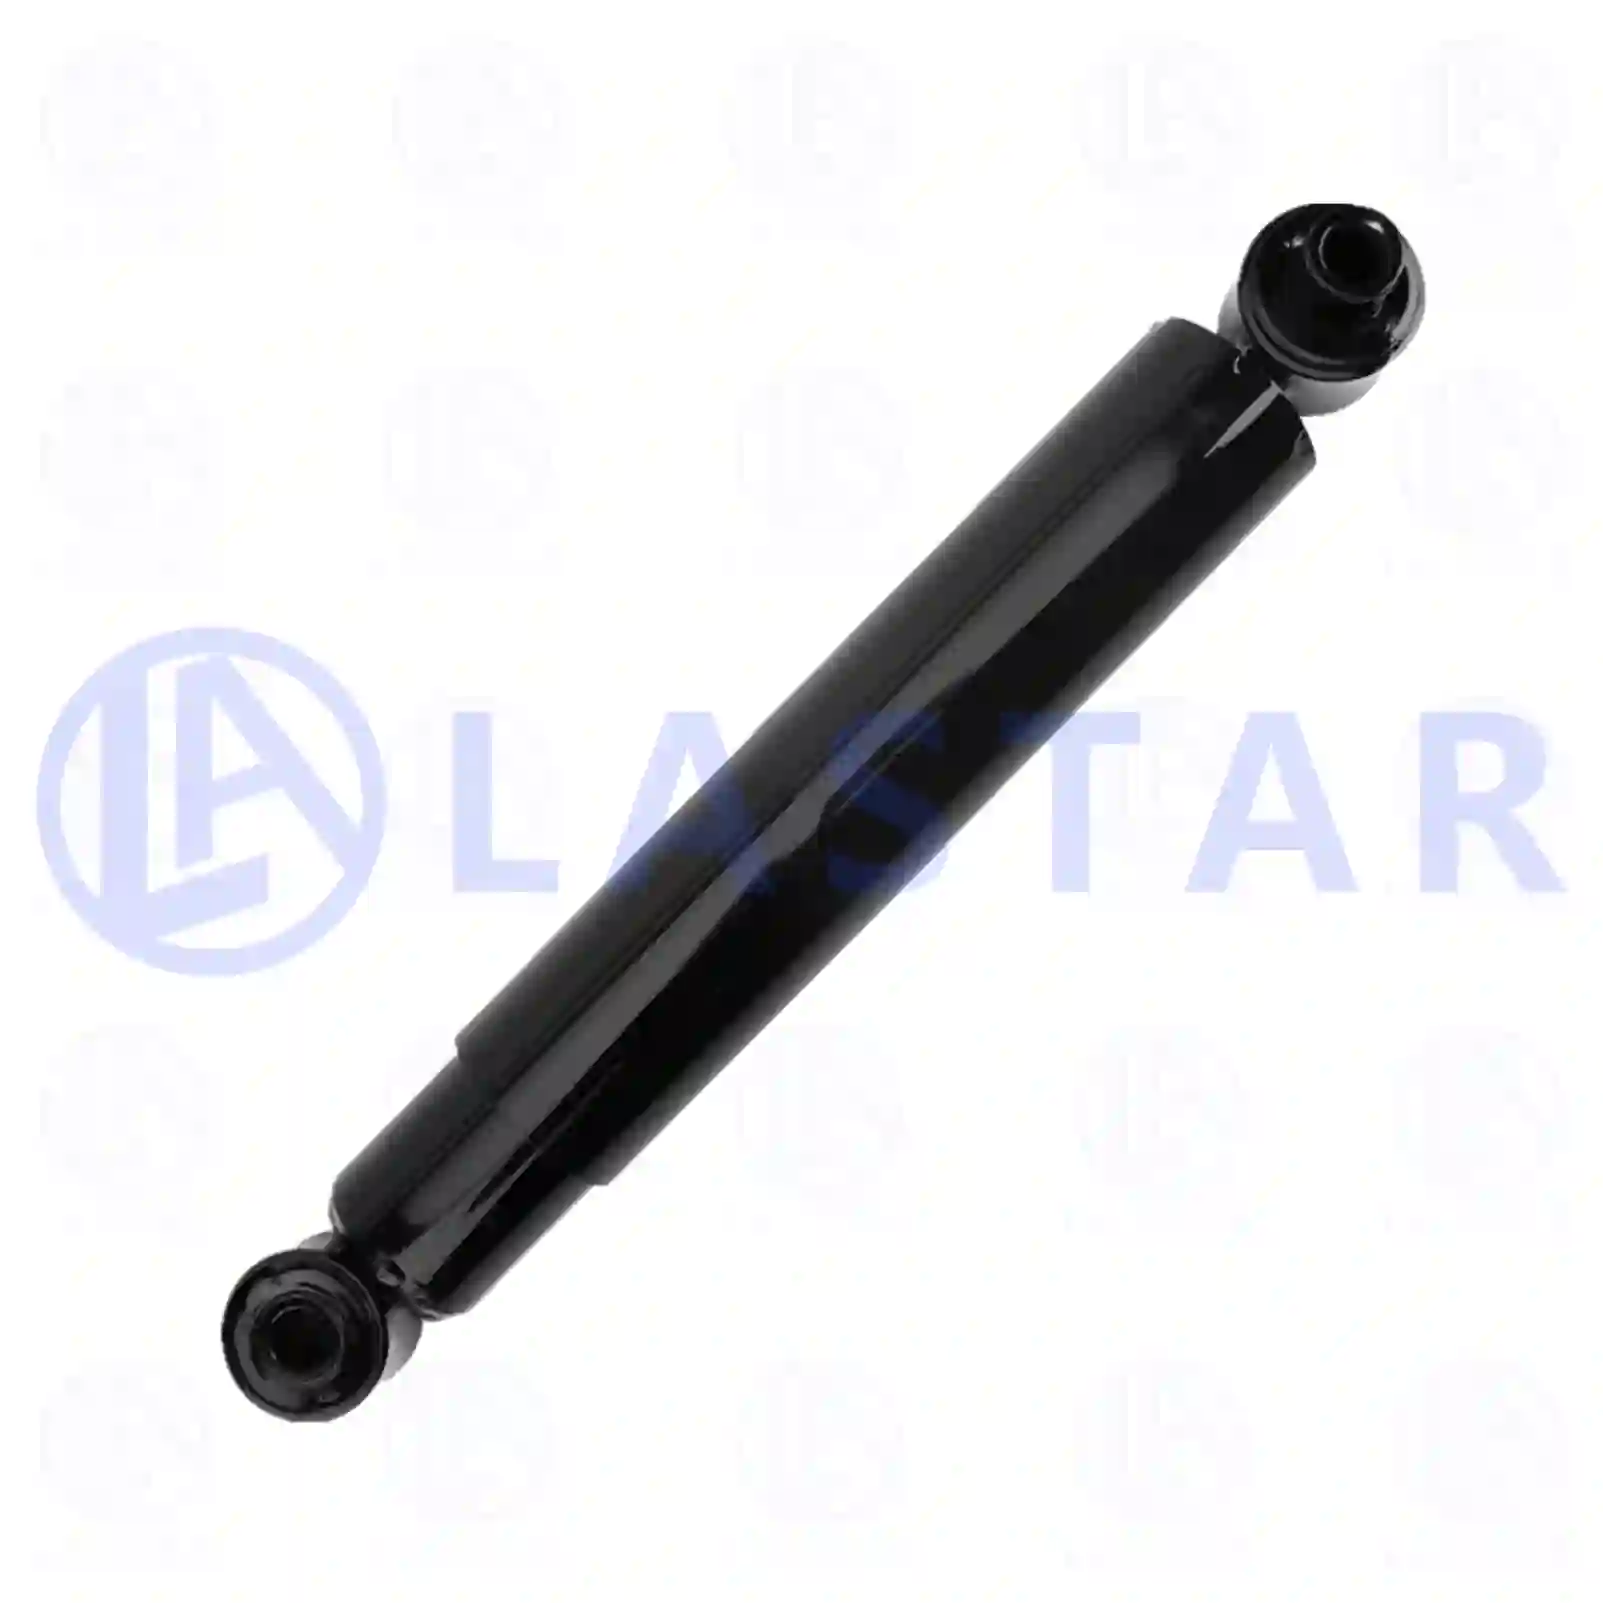 Shock absorber, 77727915, 0053266800, 0063262900, , , ||  77727915 Lastar Spare Part | Truck Spare Parts, Auotomotive Spare Parts Shock absorber, 77727915, 0053266800, 0063262900, , , ||  77727915 Lastar Spare Part | Truck Spare Parts, Auotomotive Spare Parts